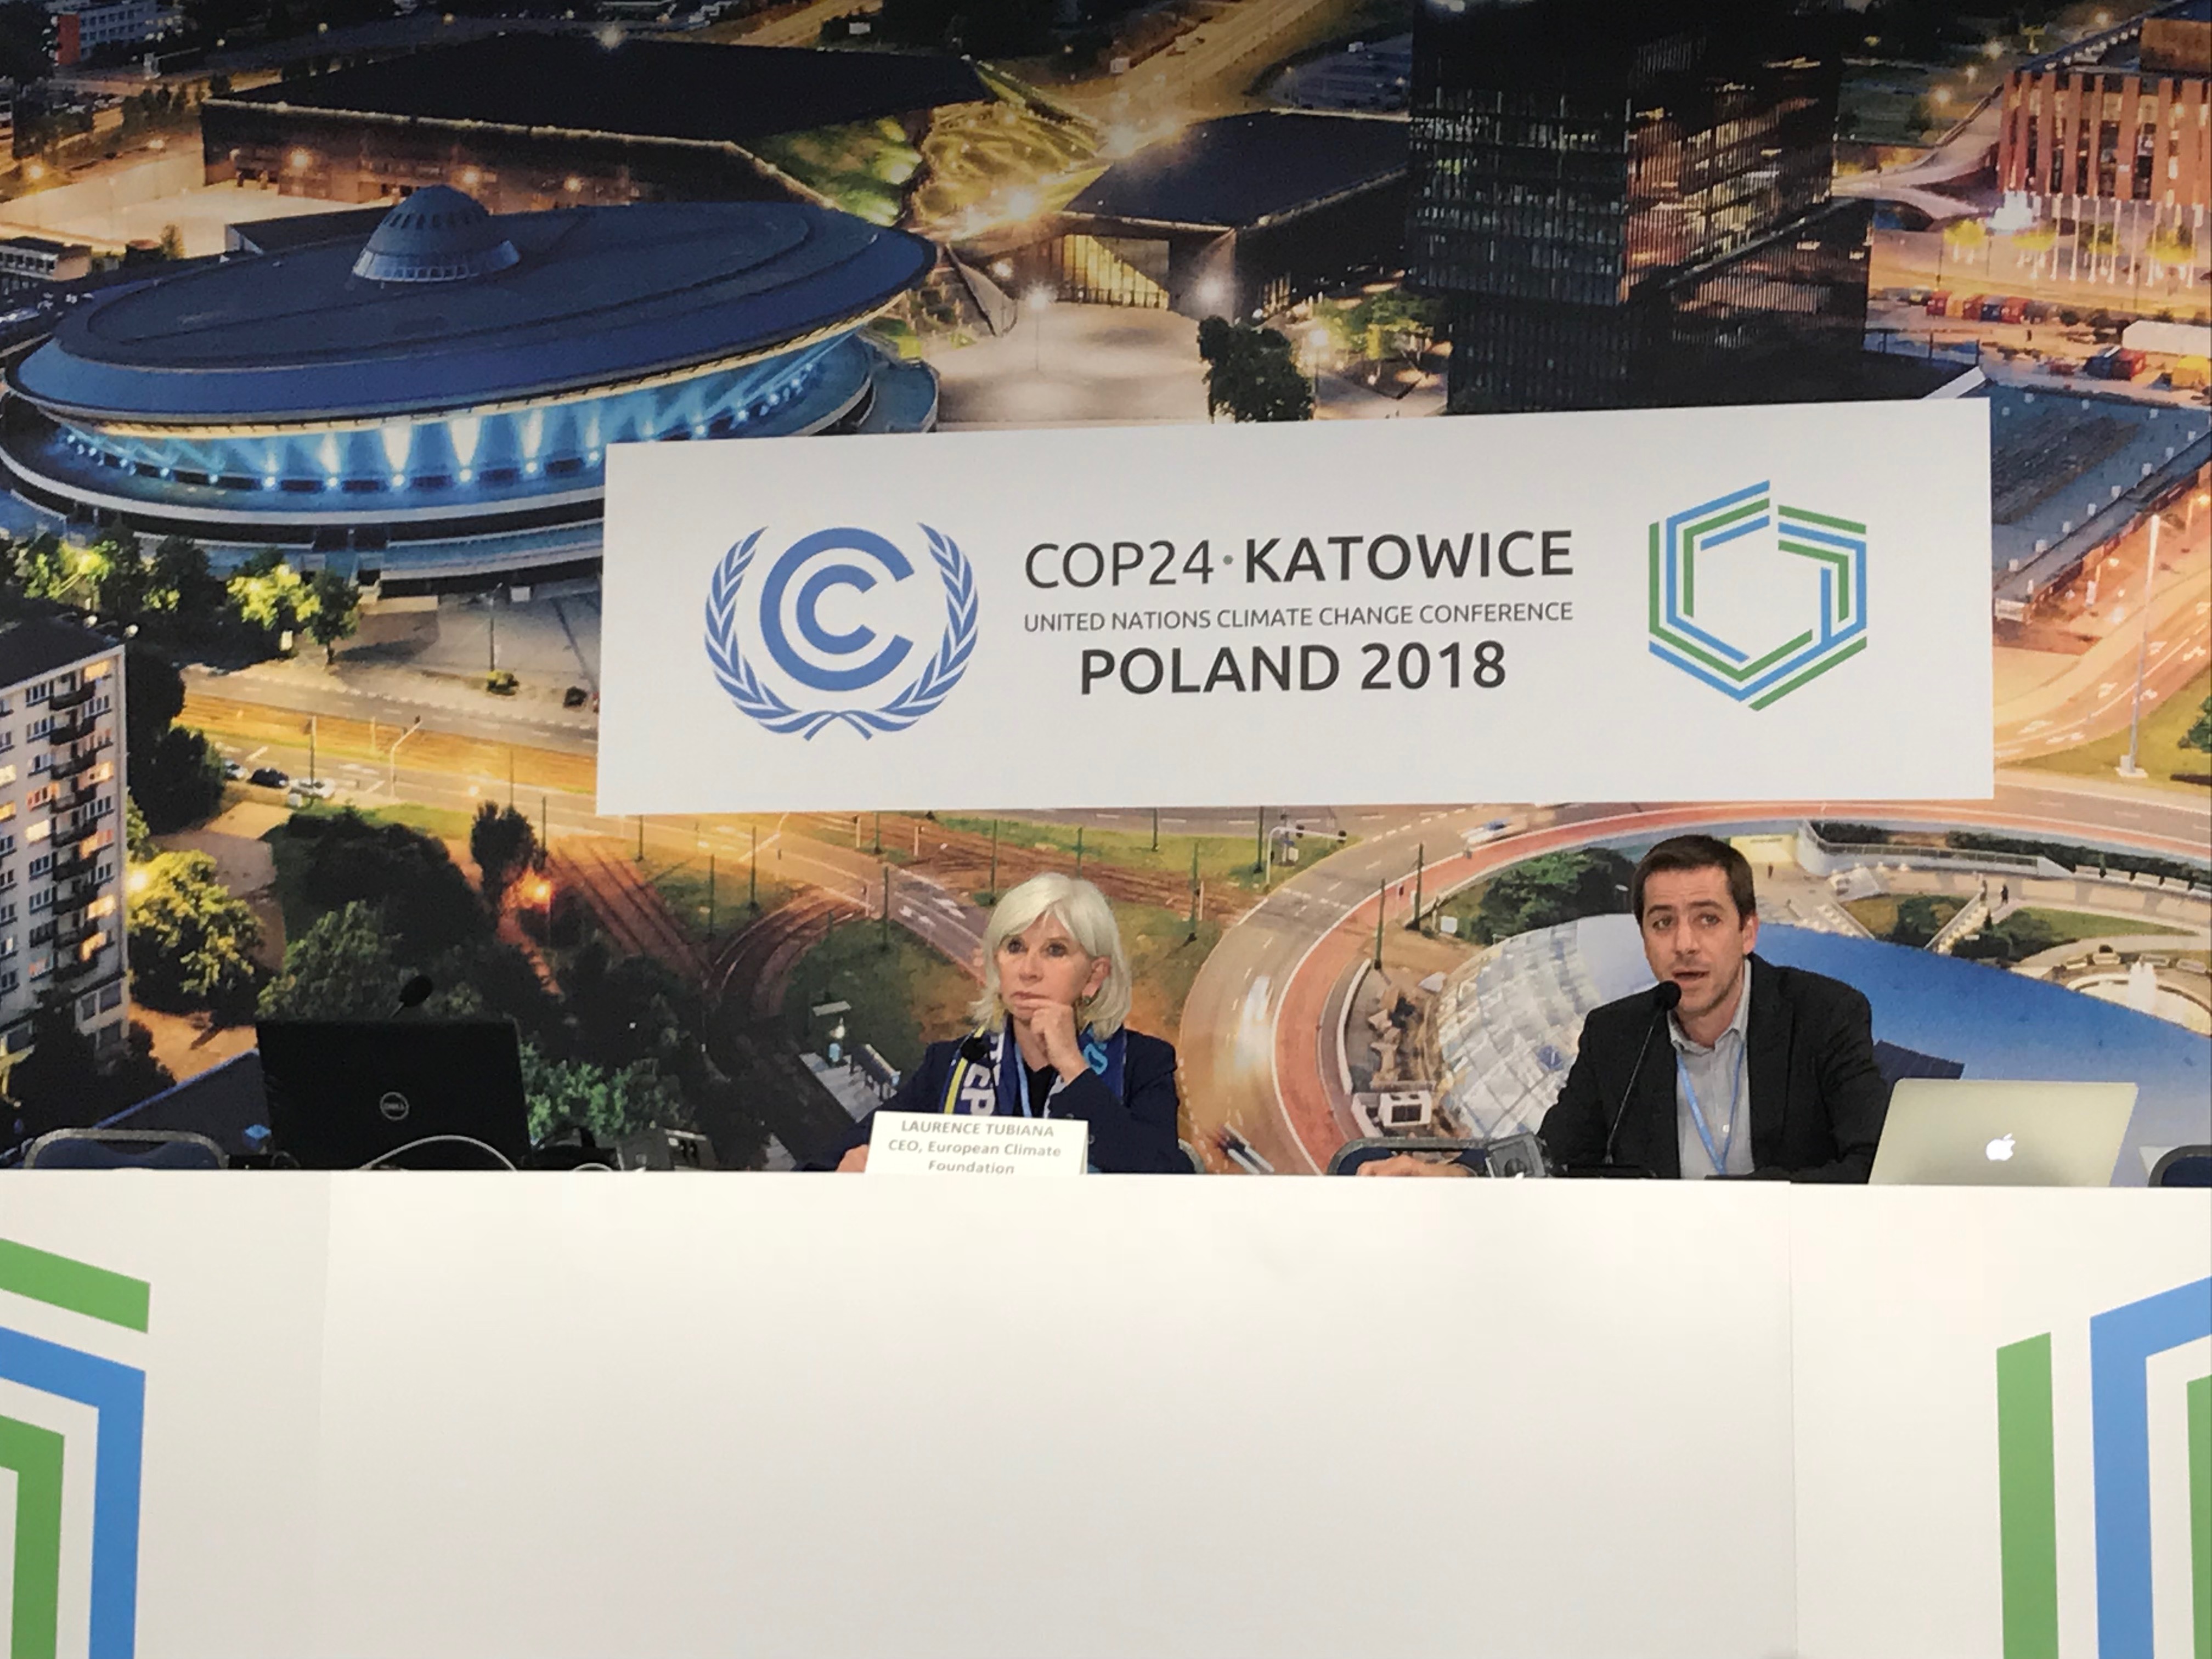 Wrestling among the big nations at Katowice climate talks